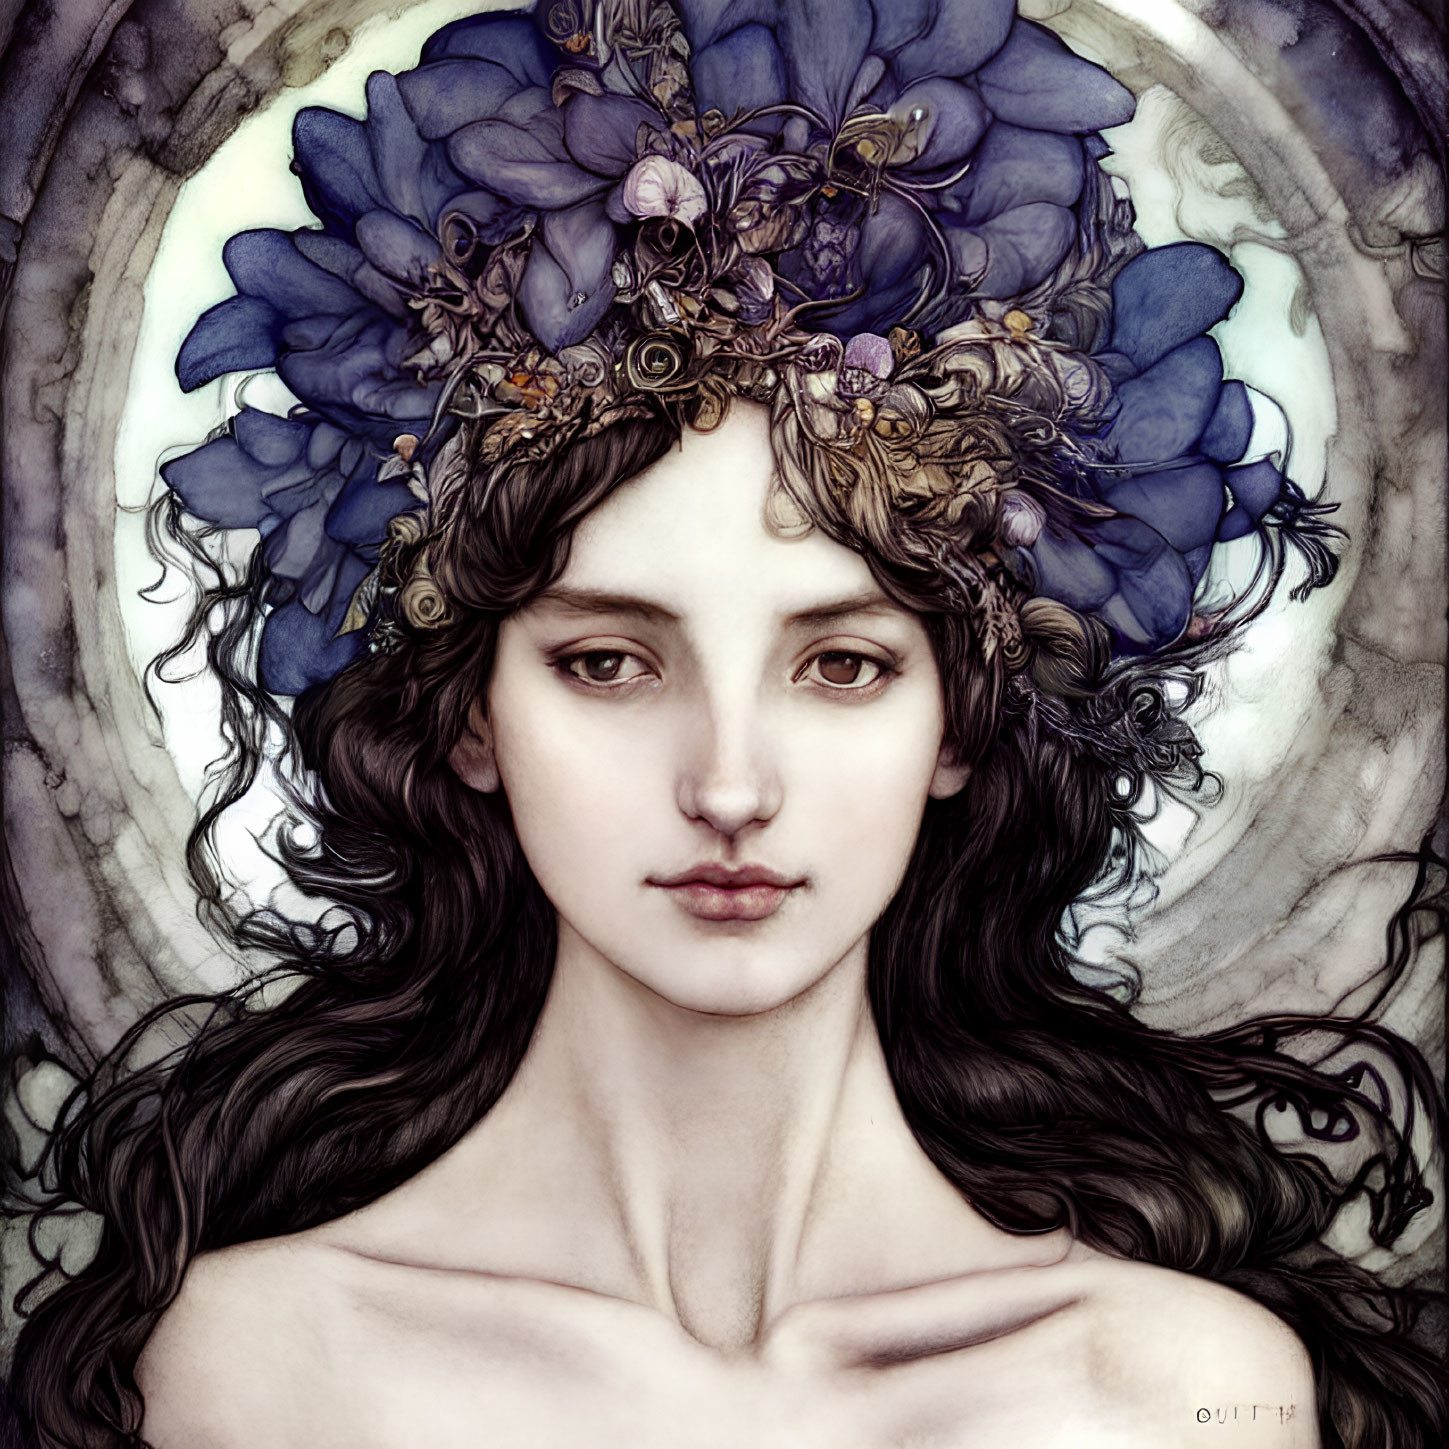 Stylized portrait of woman with dark hair and floral crown in circular background